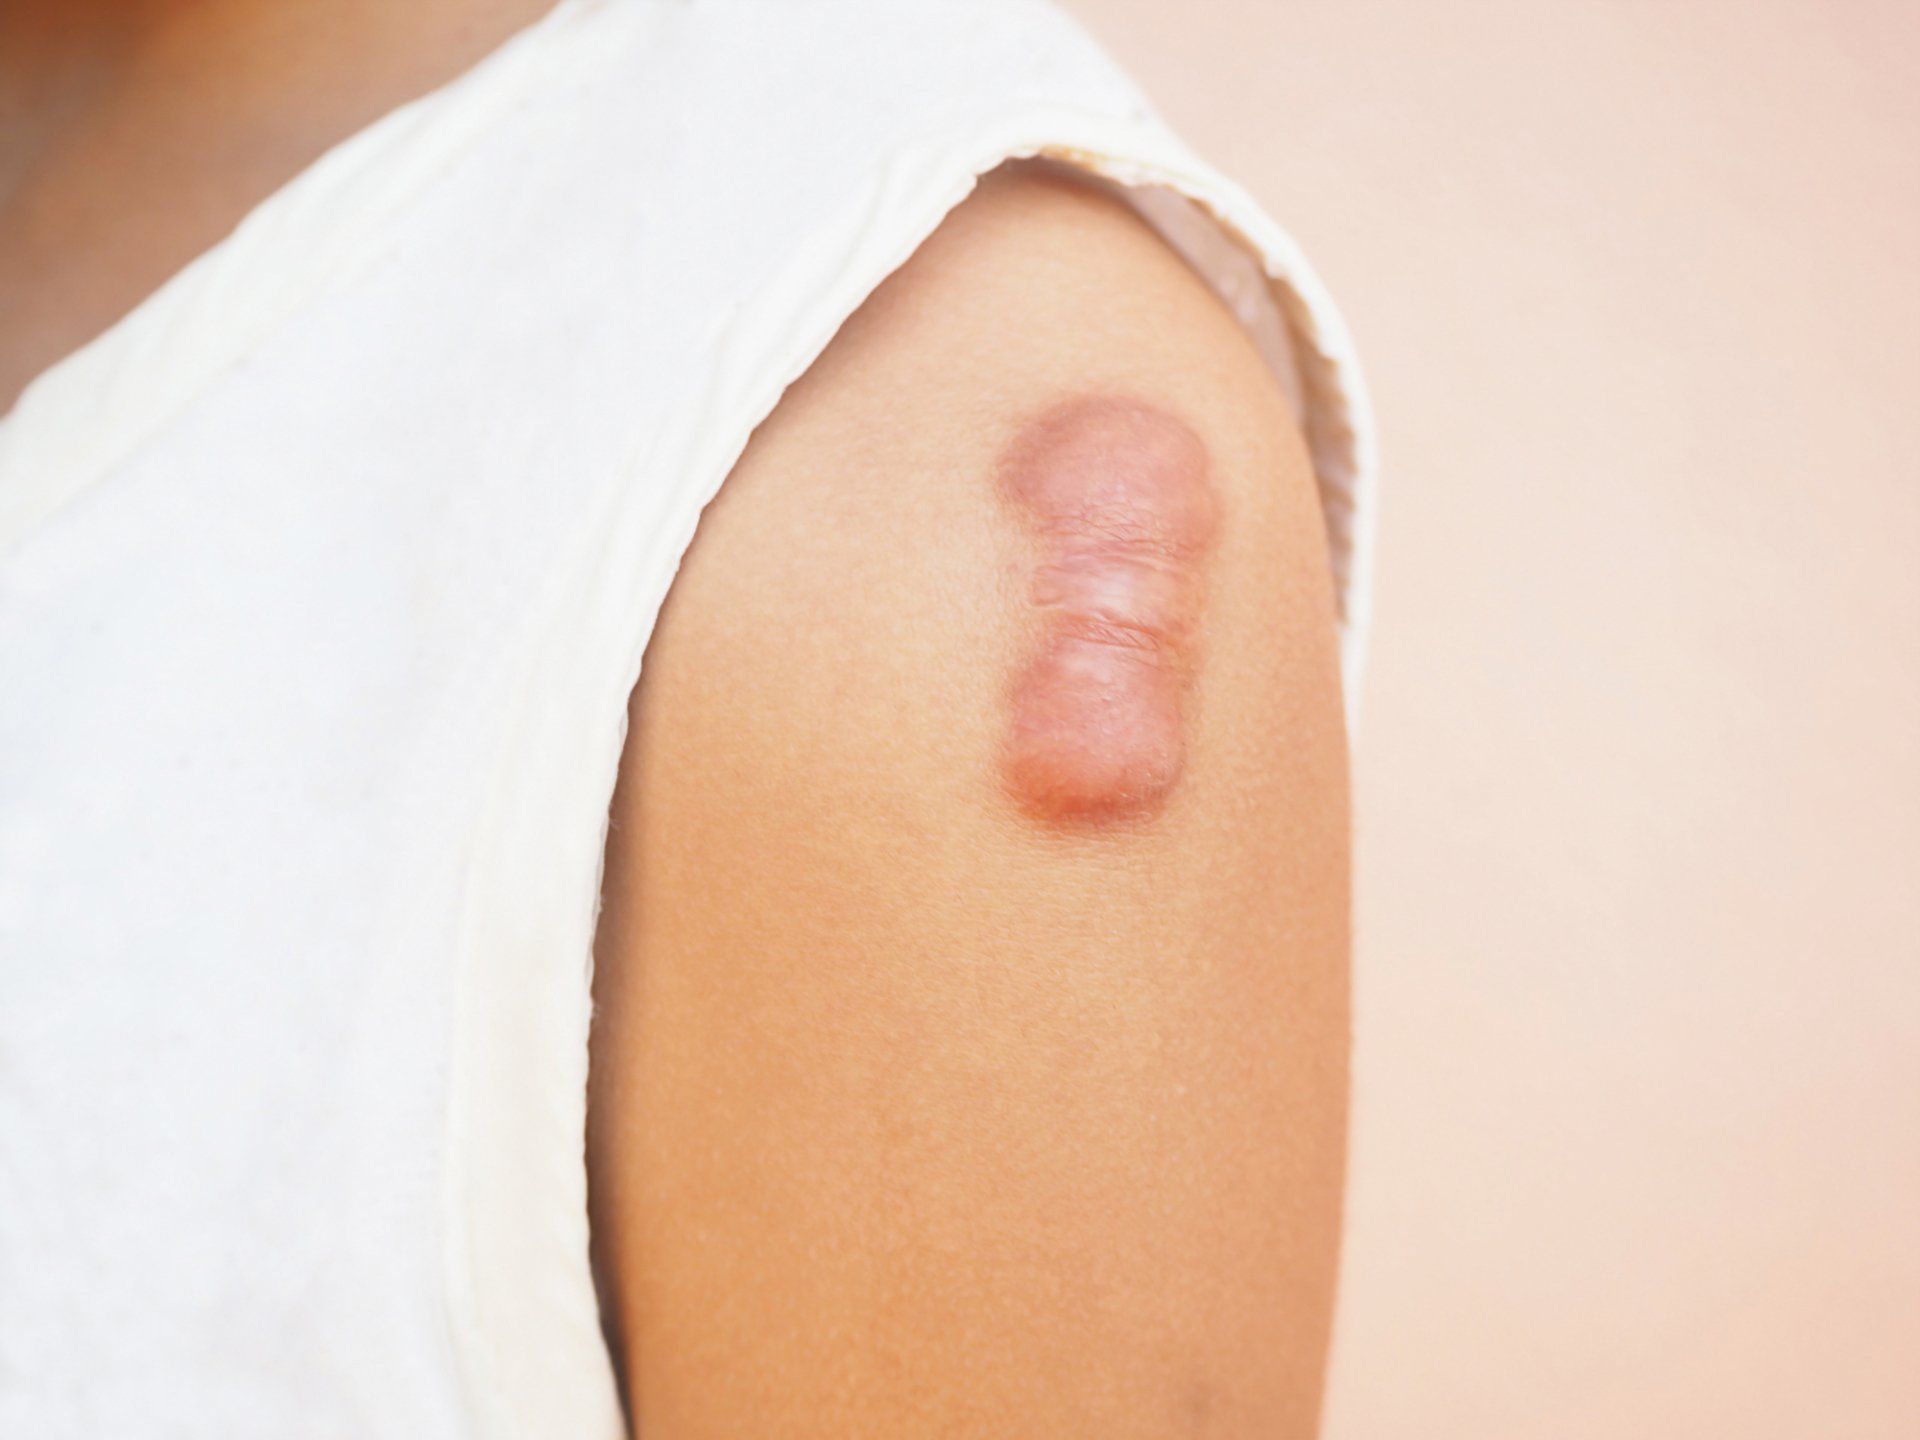 patient with large keloid scar on shoulder